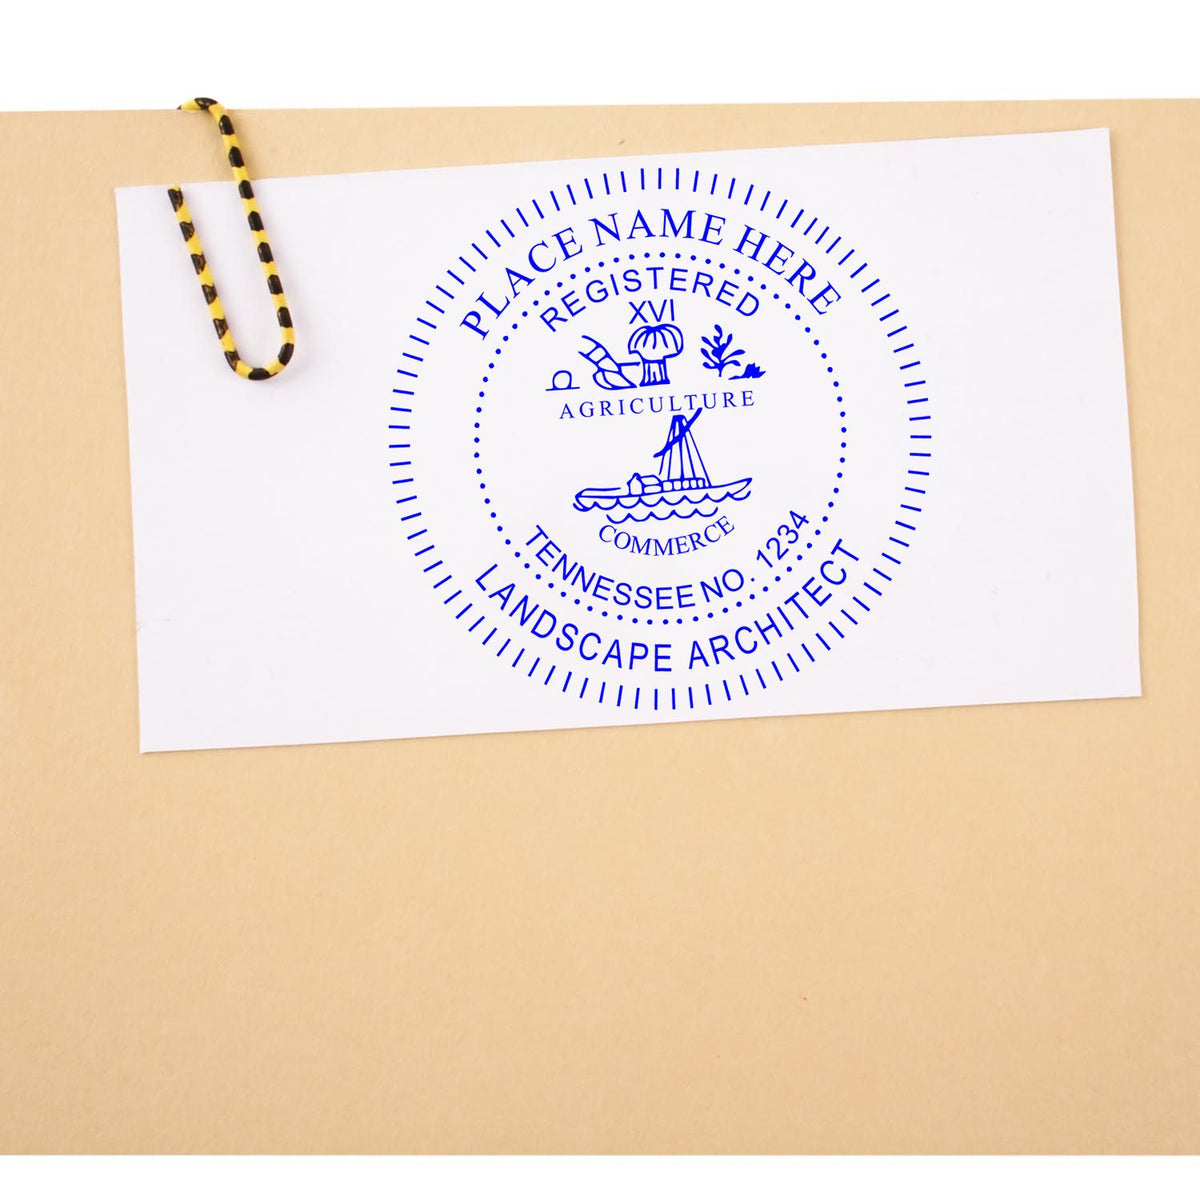 This paper is stamped with a sample imprint of the Self-Inking Tennessee Landscape Architect Stamp, signifying its quality and reliability.